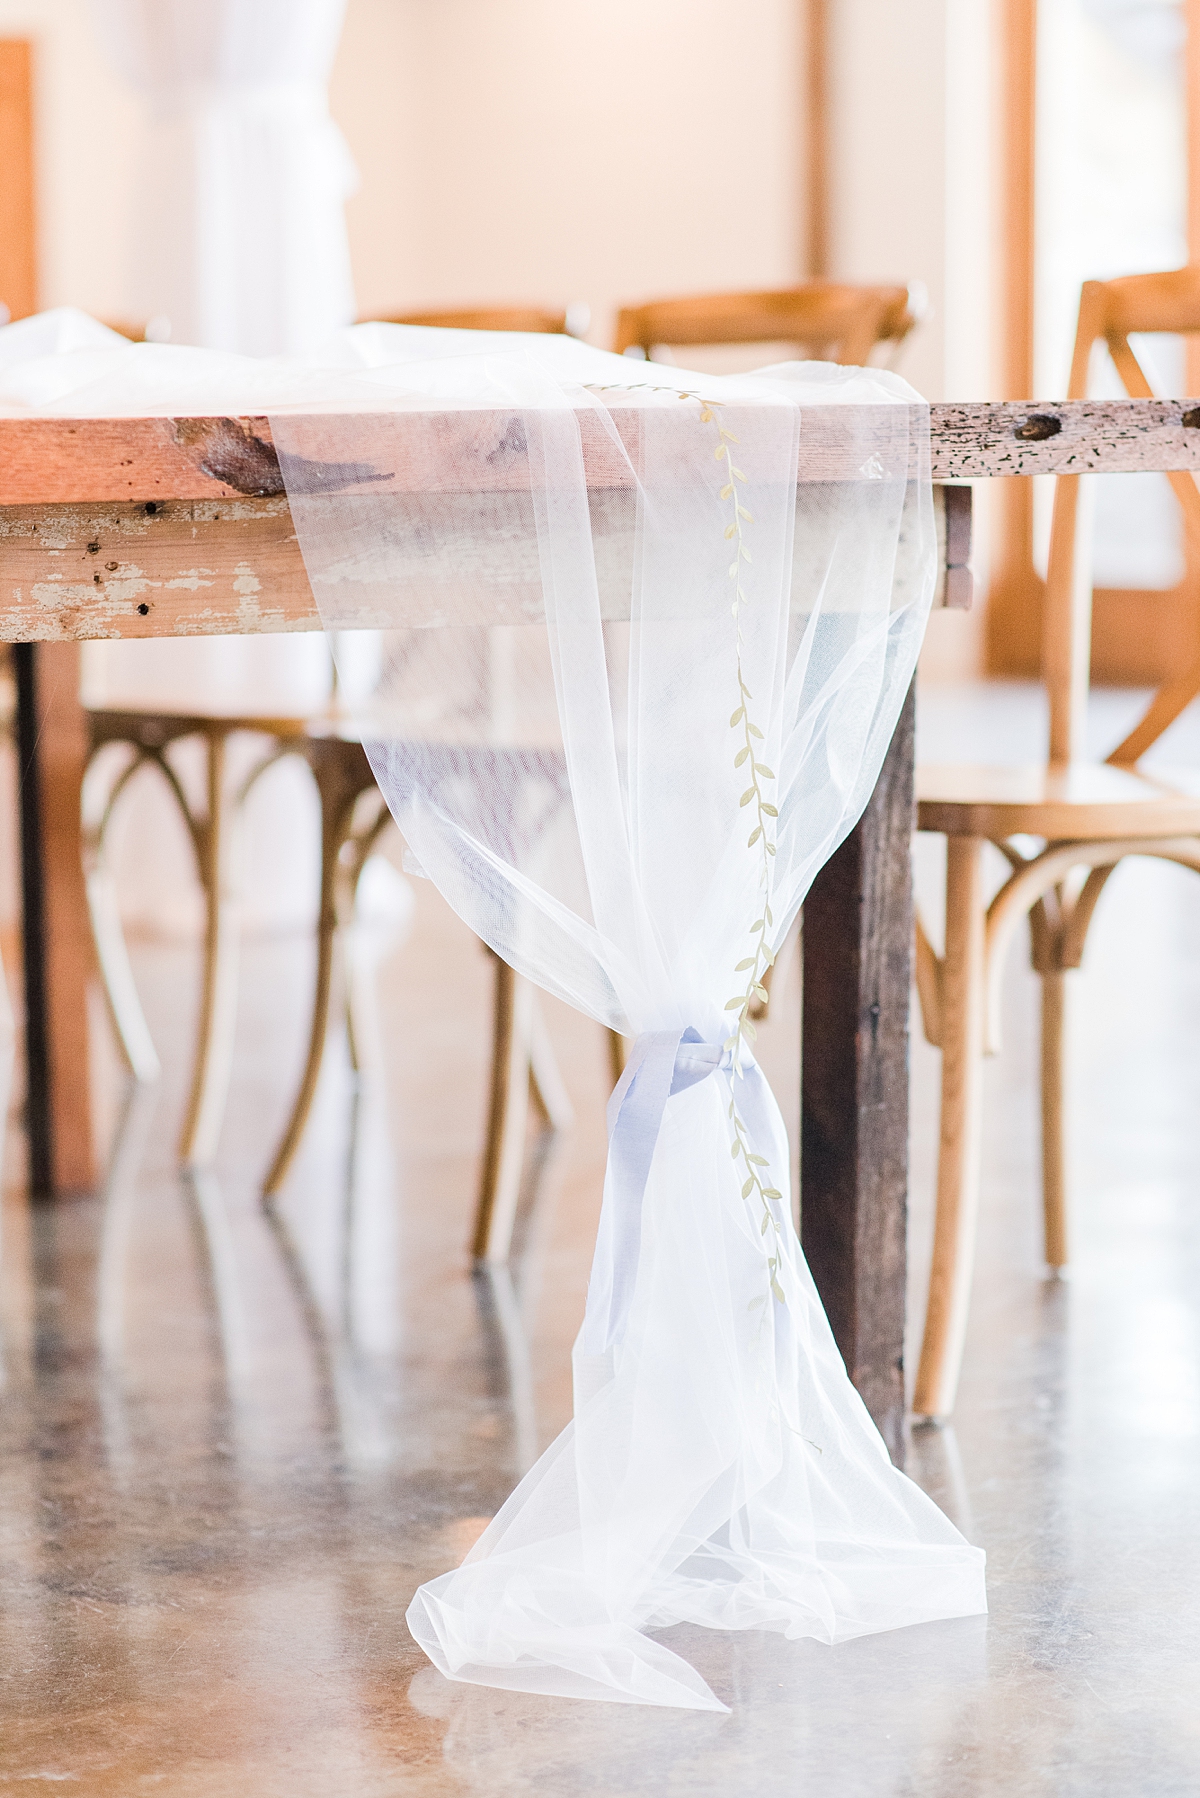 Rustic Wedding Reception Decor for Granary at Valley Pike Wedding.  Wedding Photography by Charlottesville Wedding Photographer Kailey Brianne Photography. 